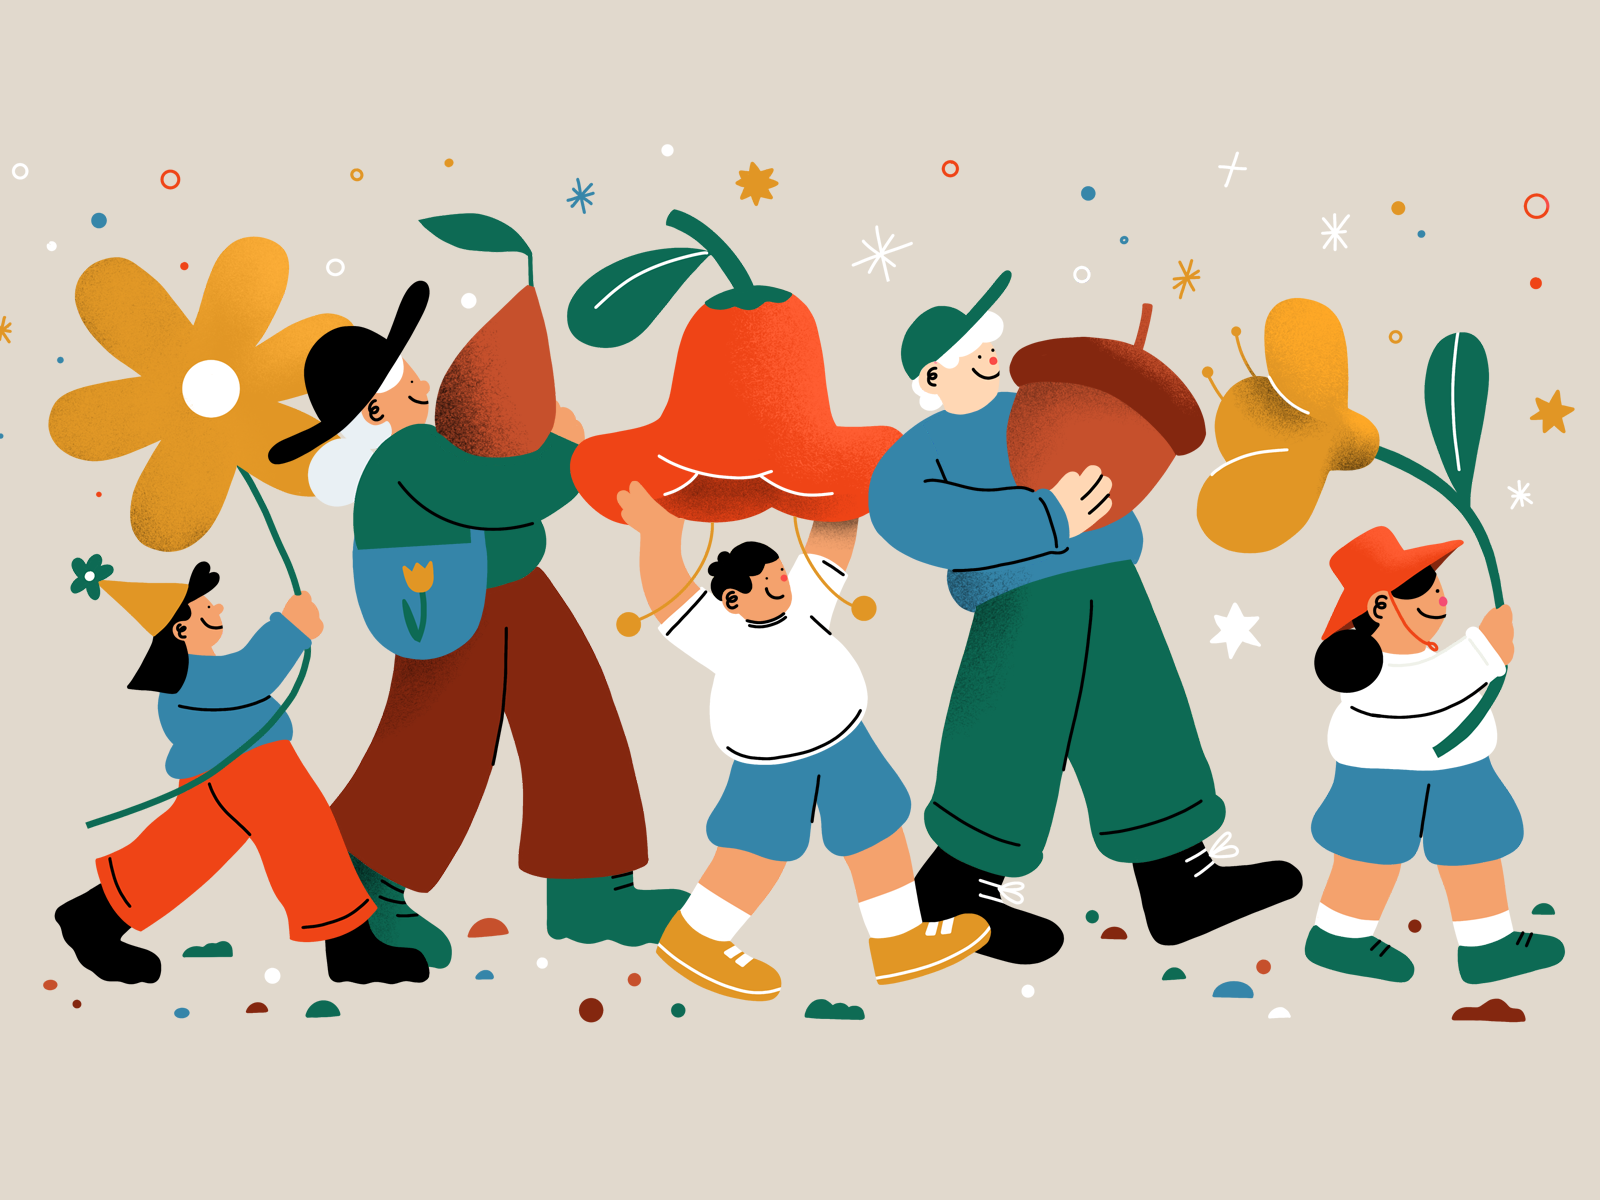 Spring Parade by Ally Jaye Reeves on Dribbble